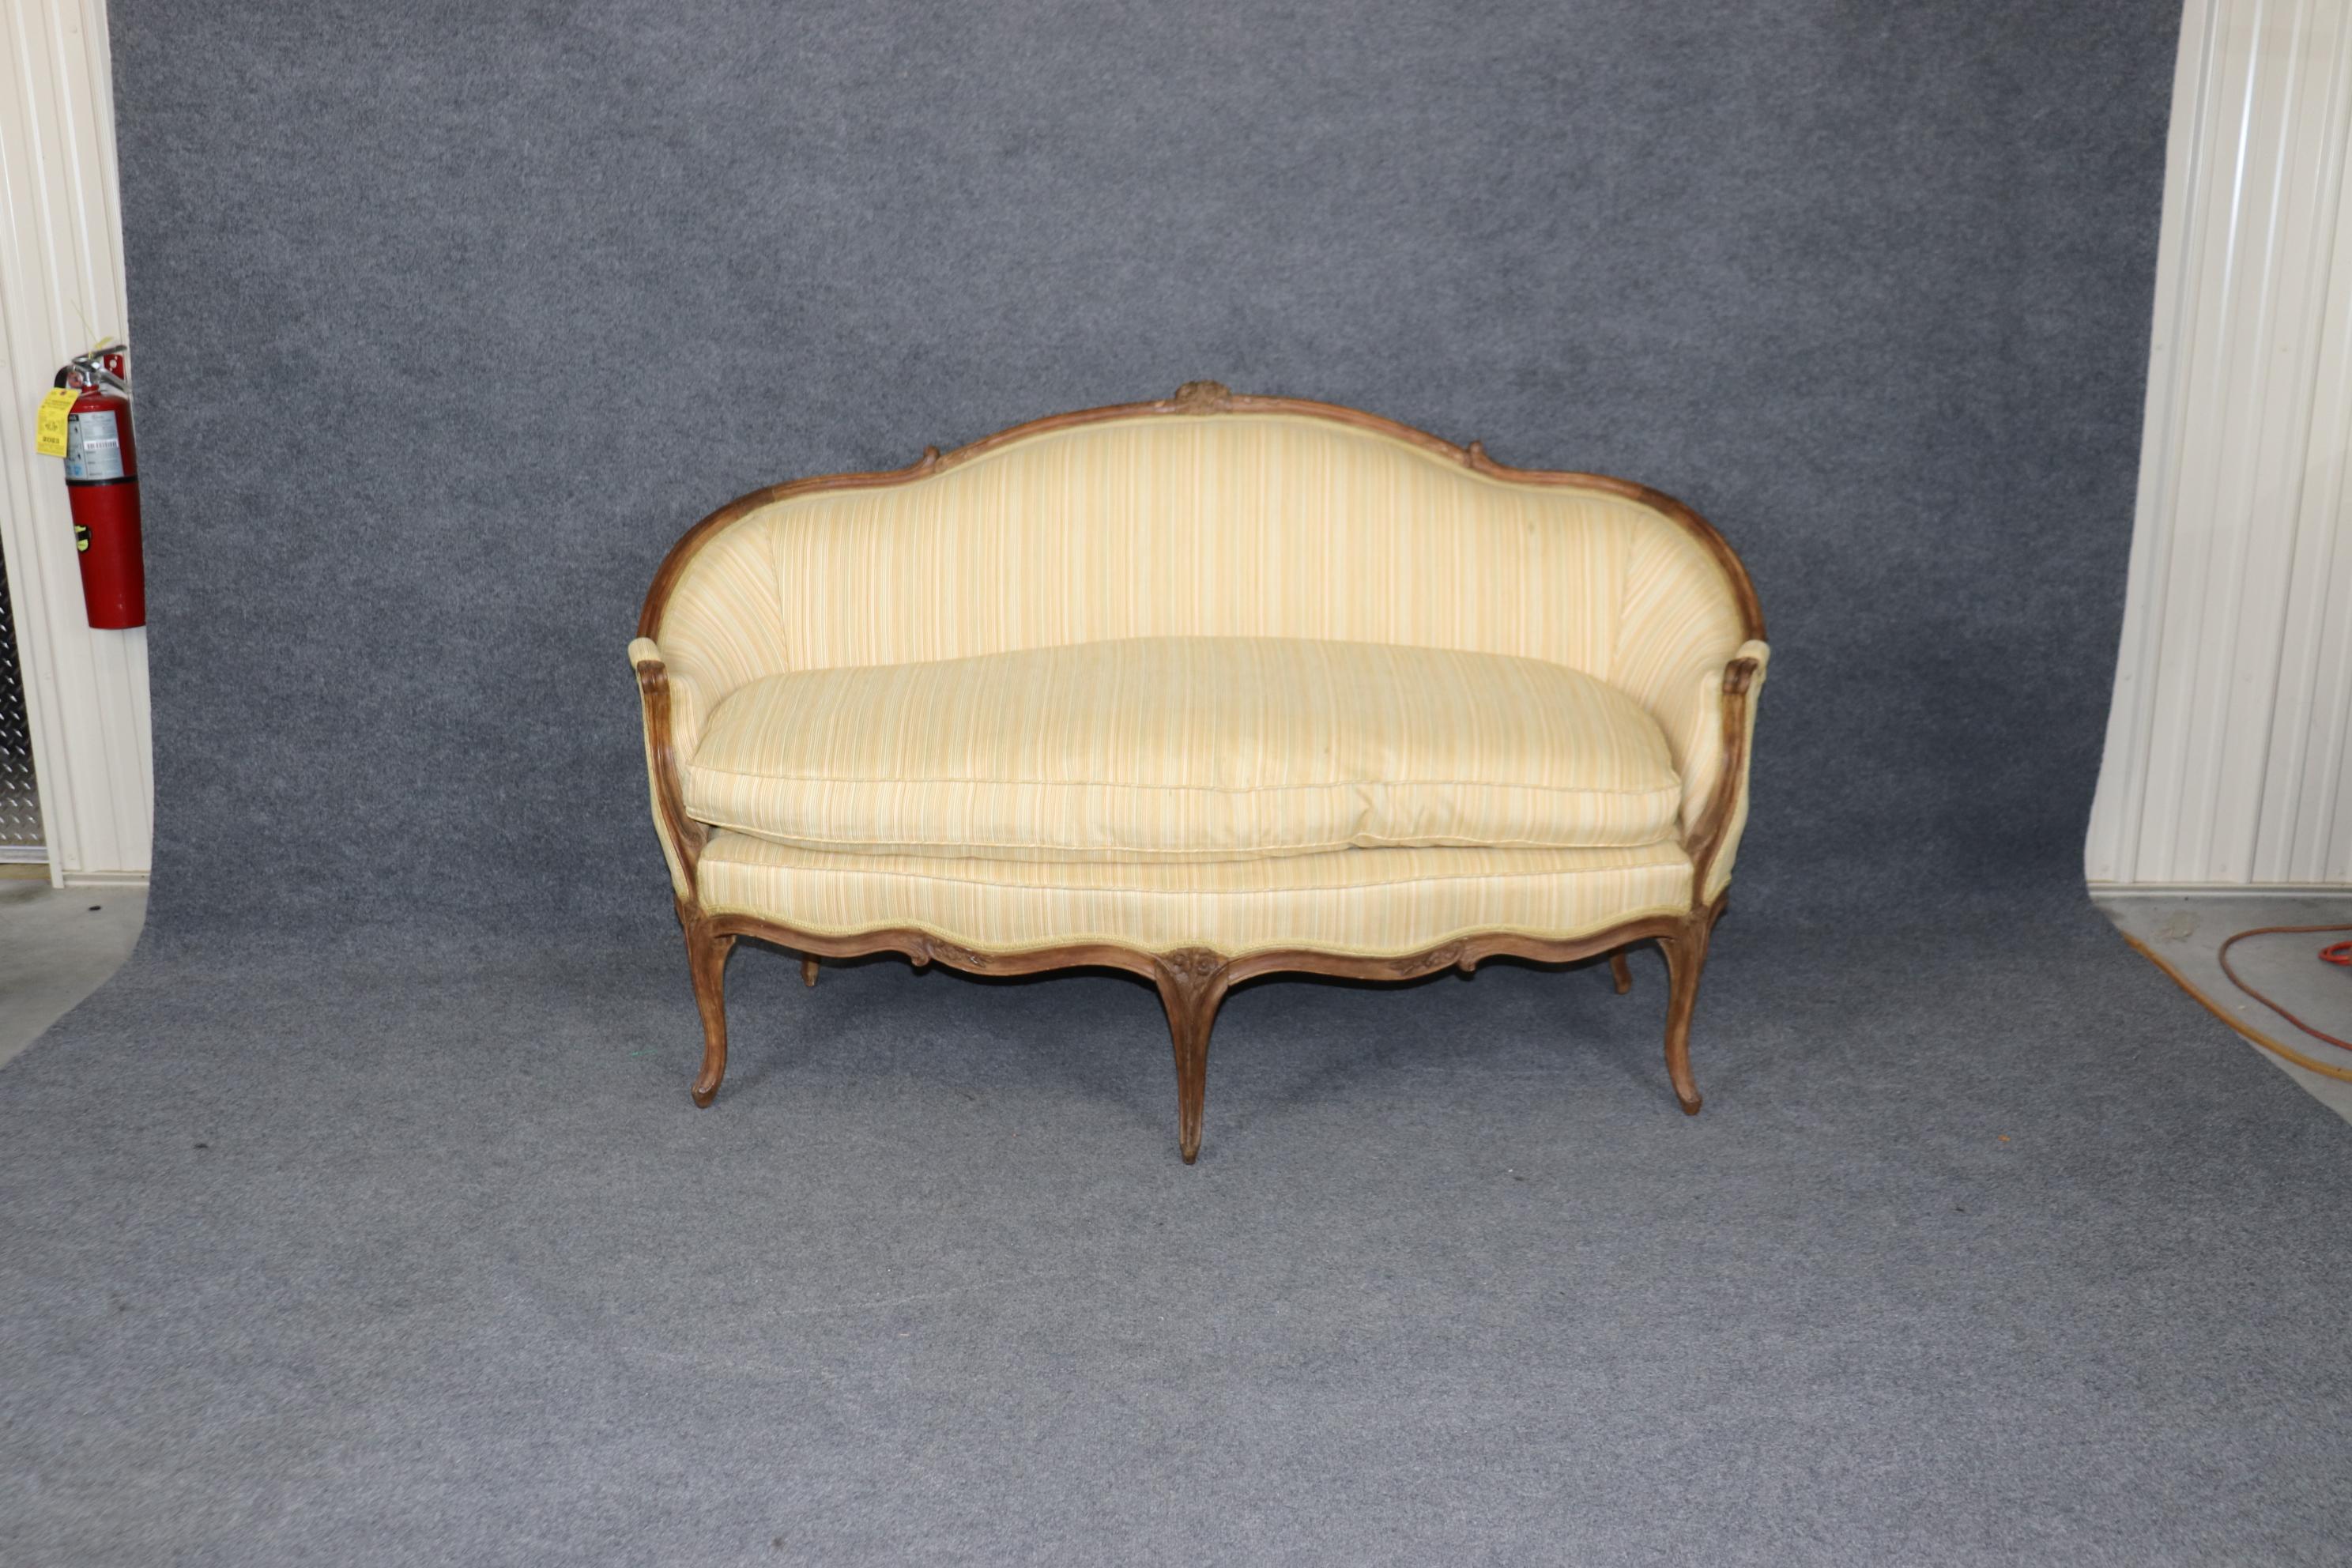 This is a gorgeous hand-carved 1780ss French settee. The settee shows its original finish with its original signs of age and use and minor antique repairs. The upholstery is still quite good but does have minor signs of age and wear and stains.